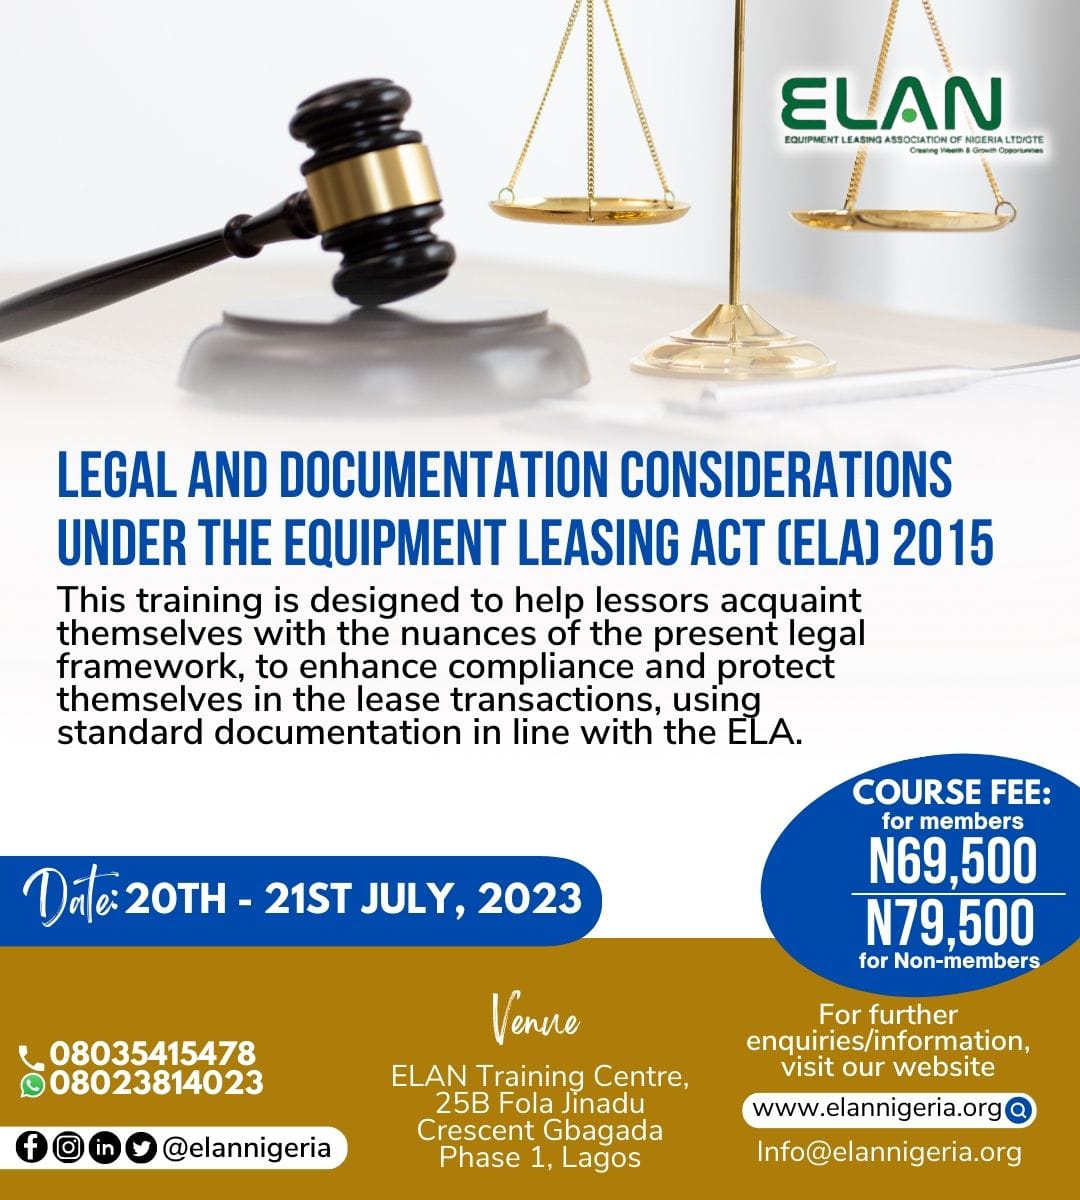 LEGAL AND DOCUMENTATION CONSIDERATIONS UNDER THE ELA 2015